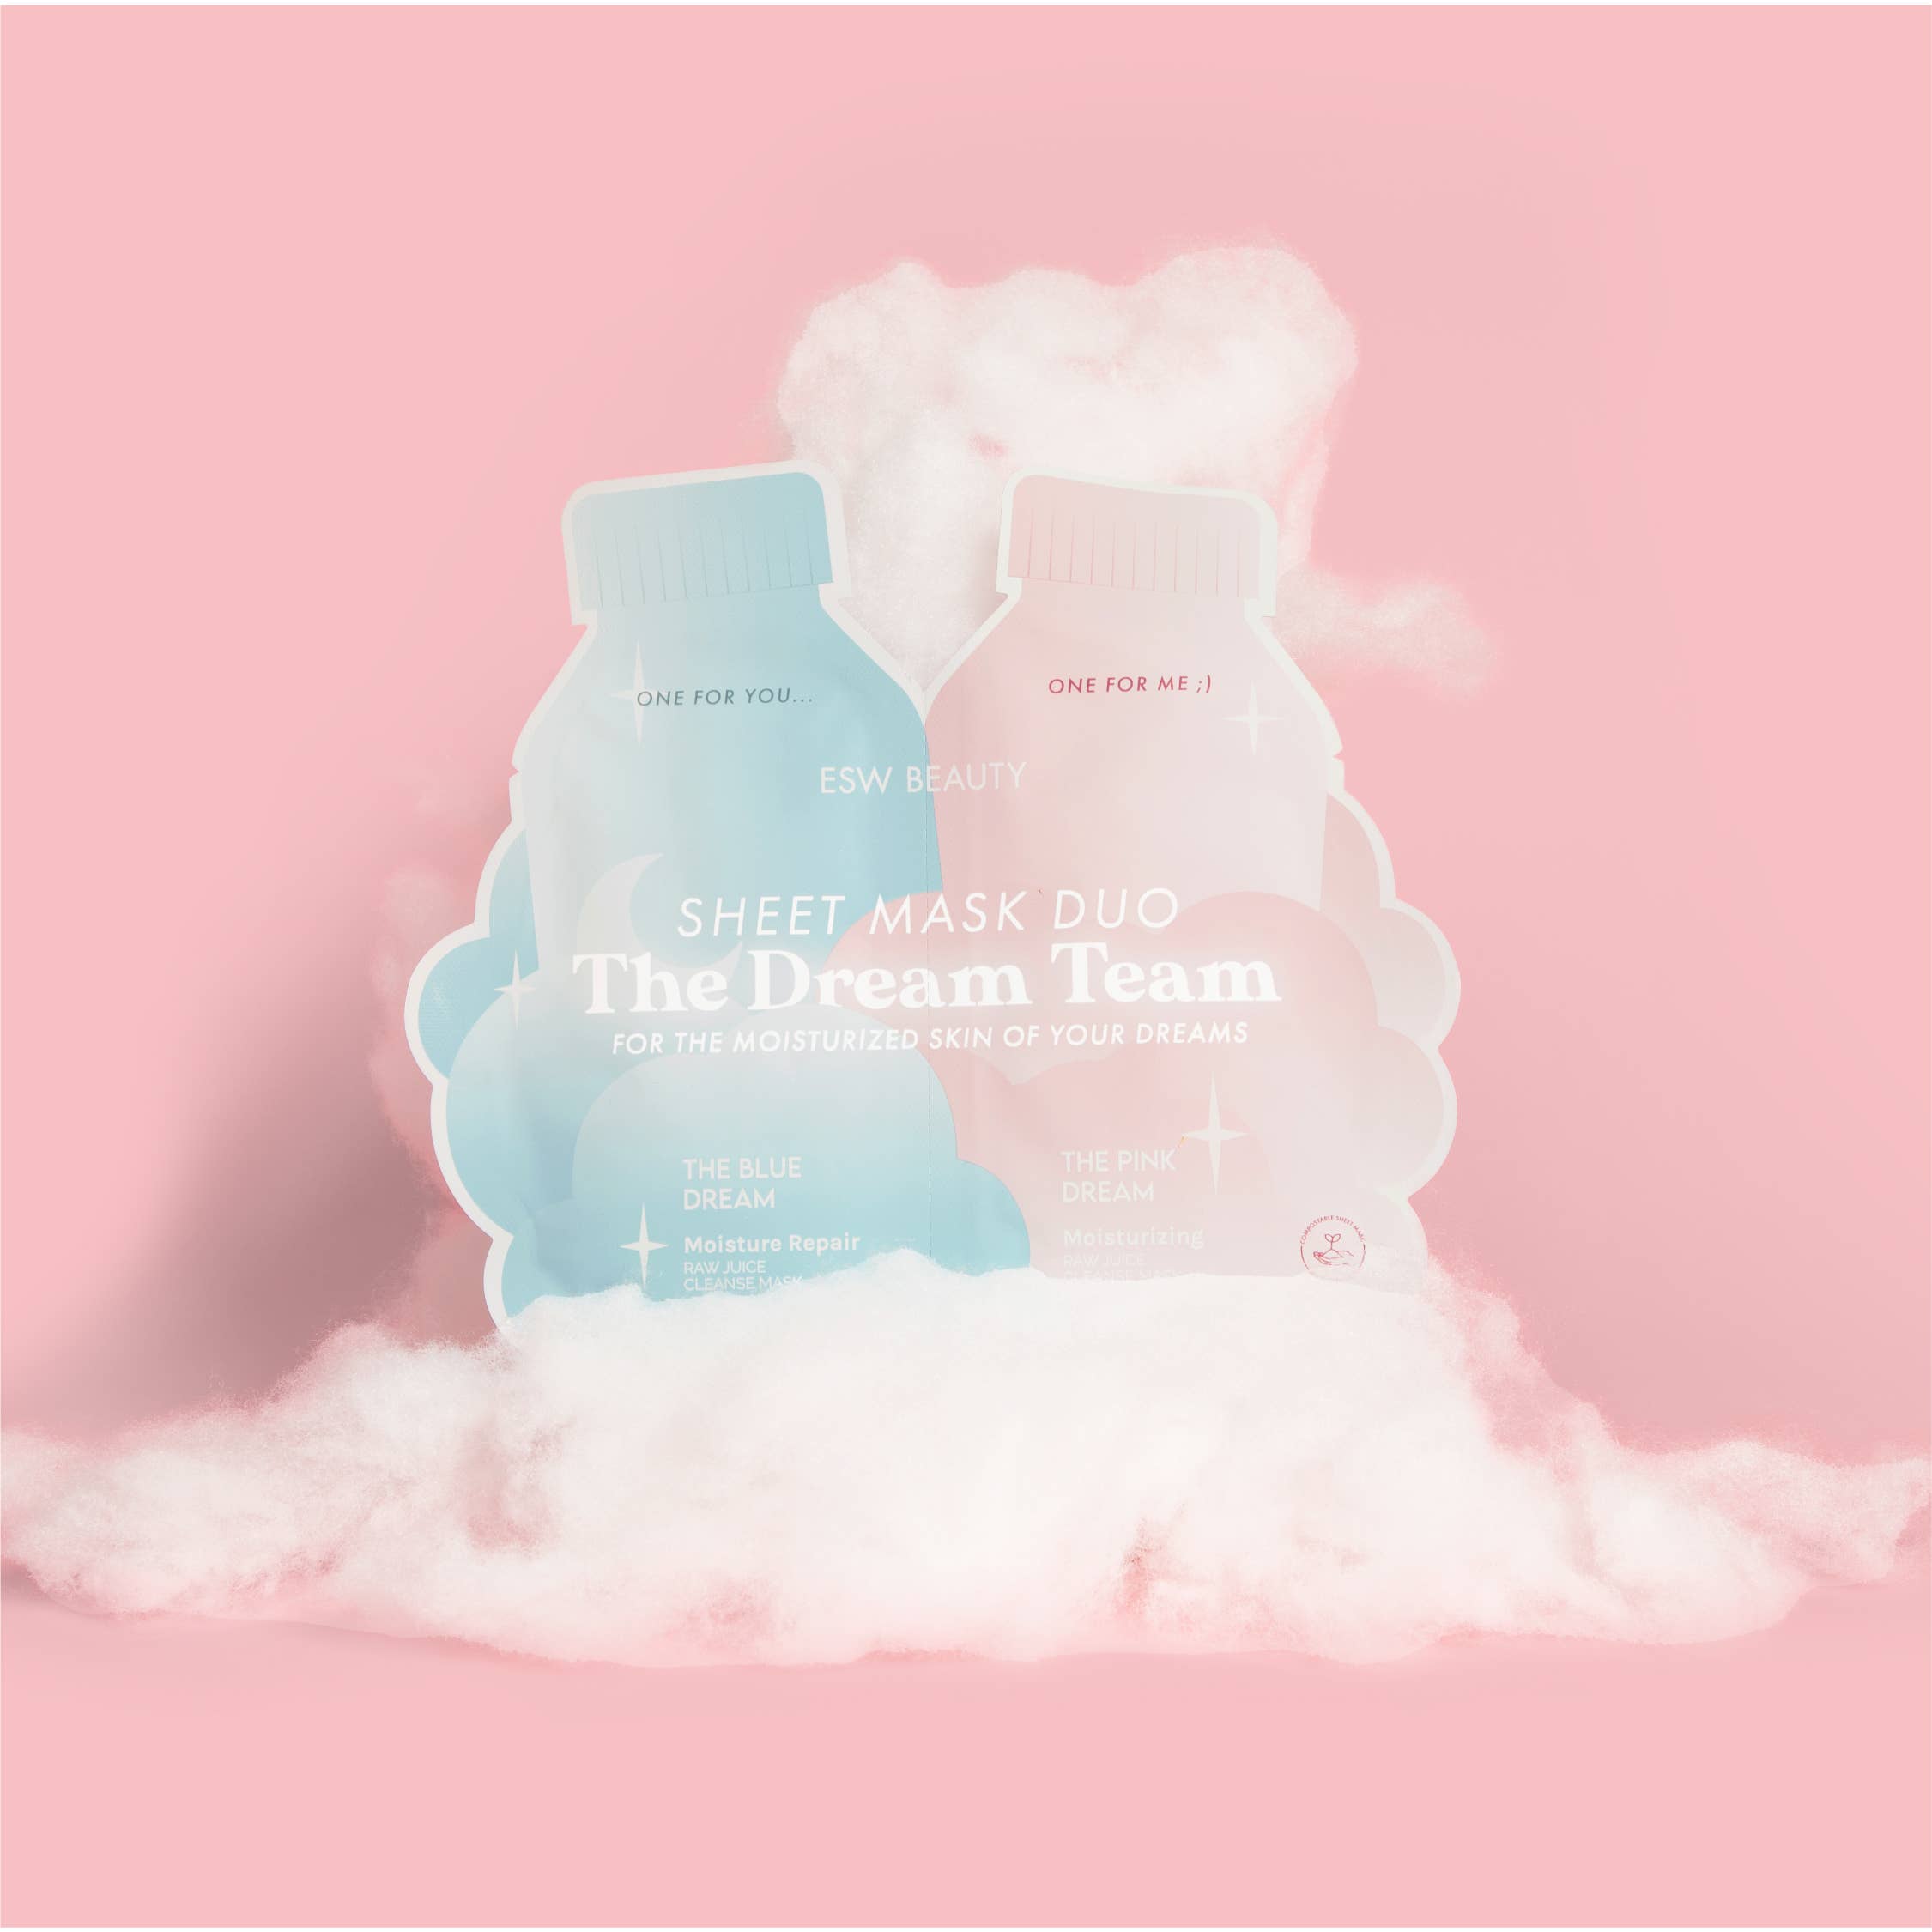 ESW Beauty- The Dream Team Sheet Mask Duo